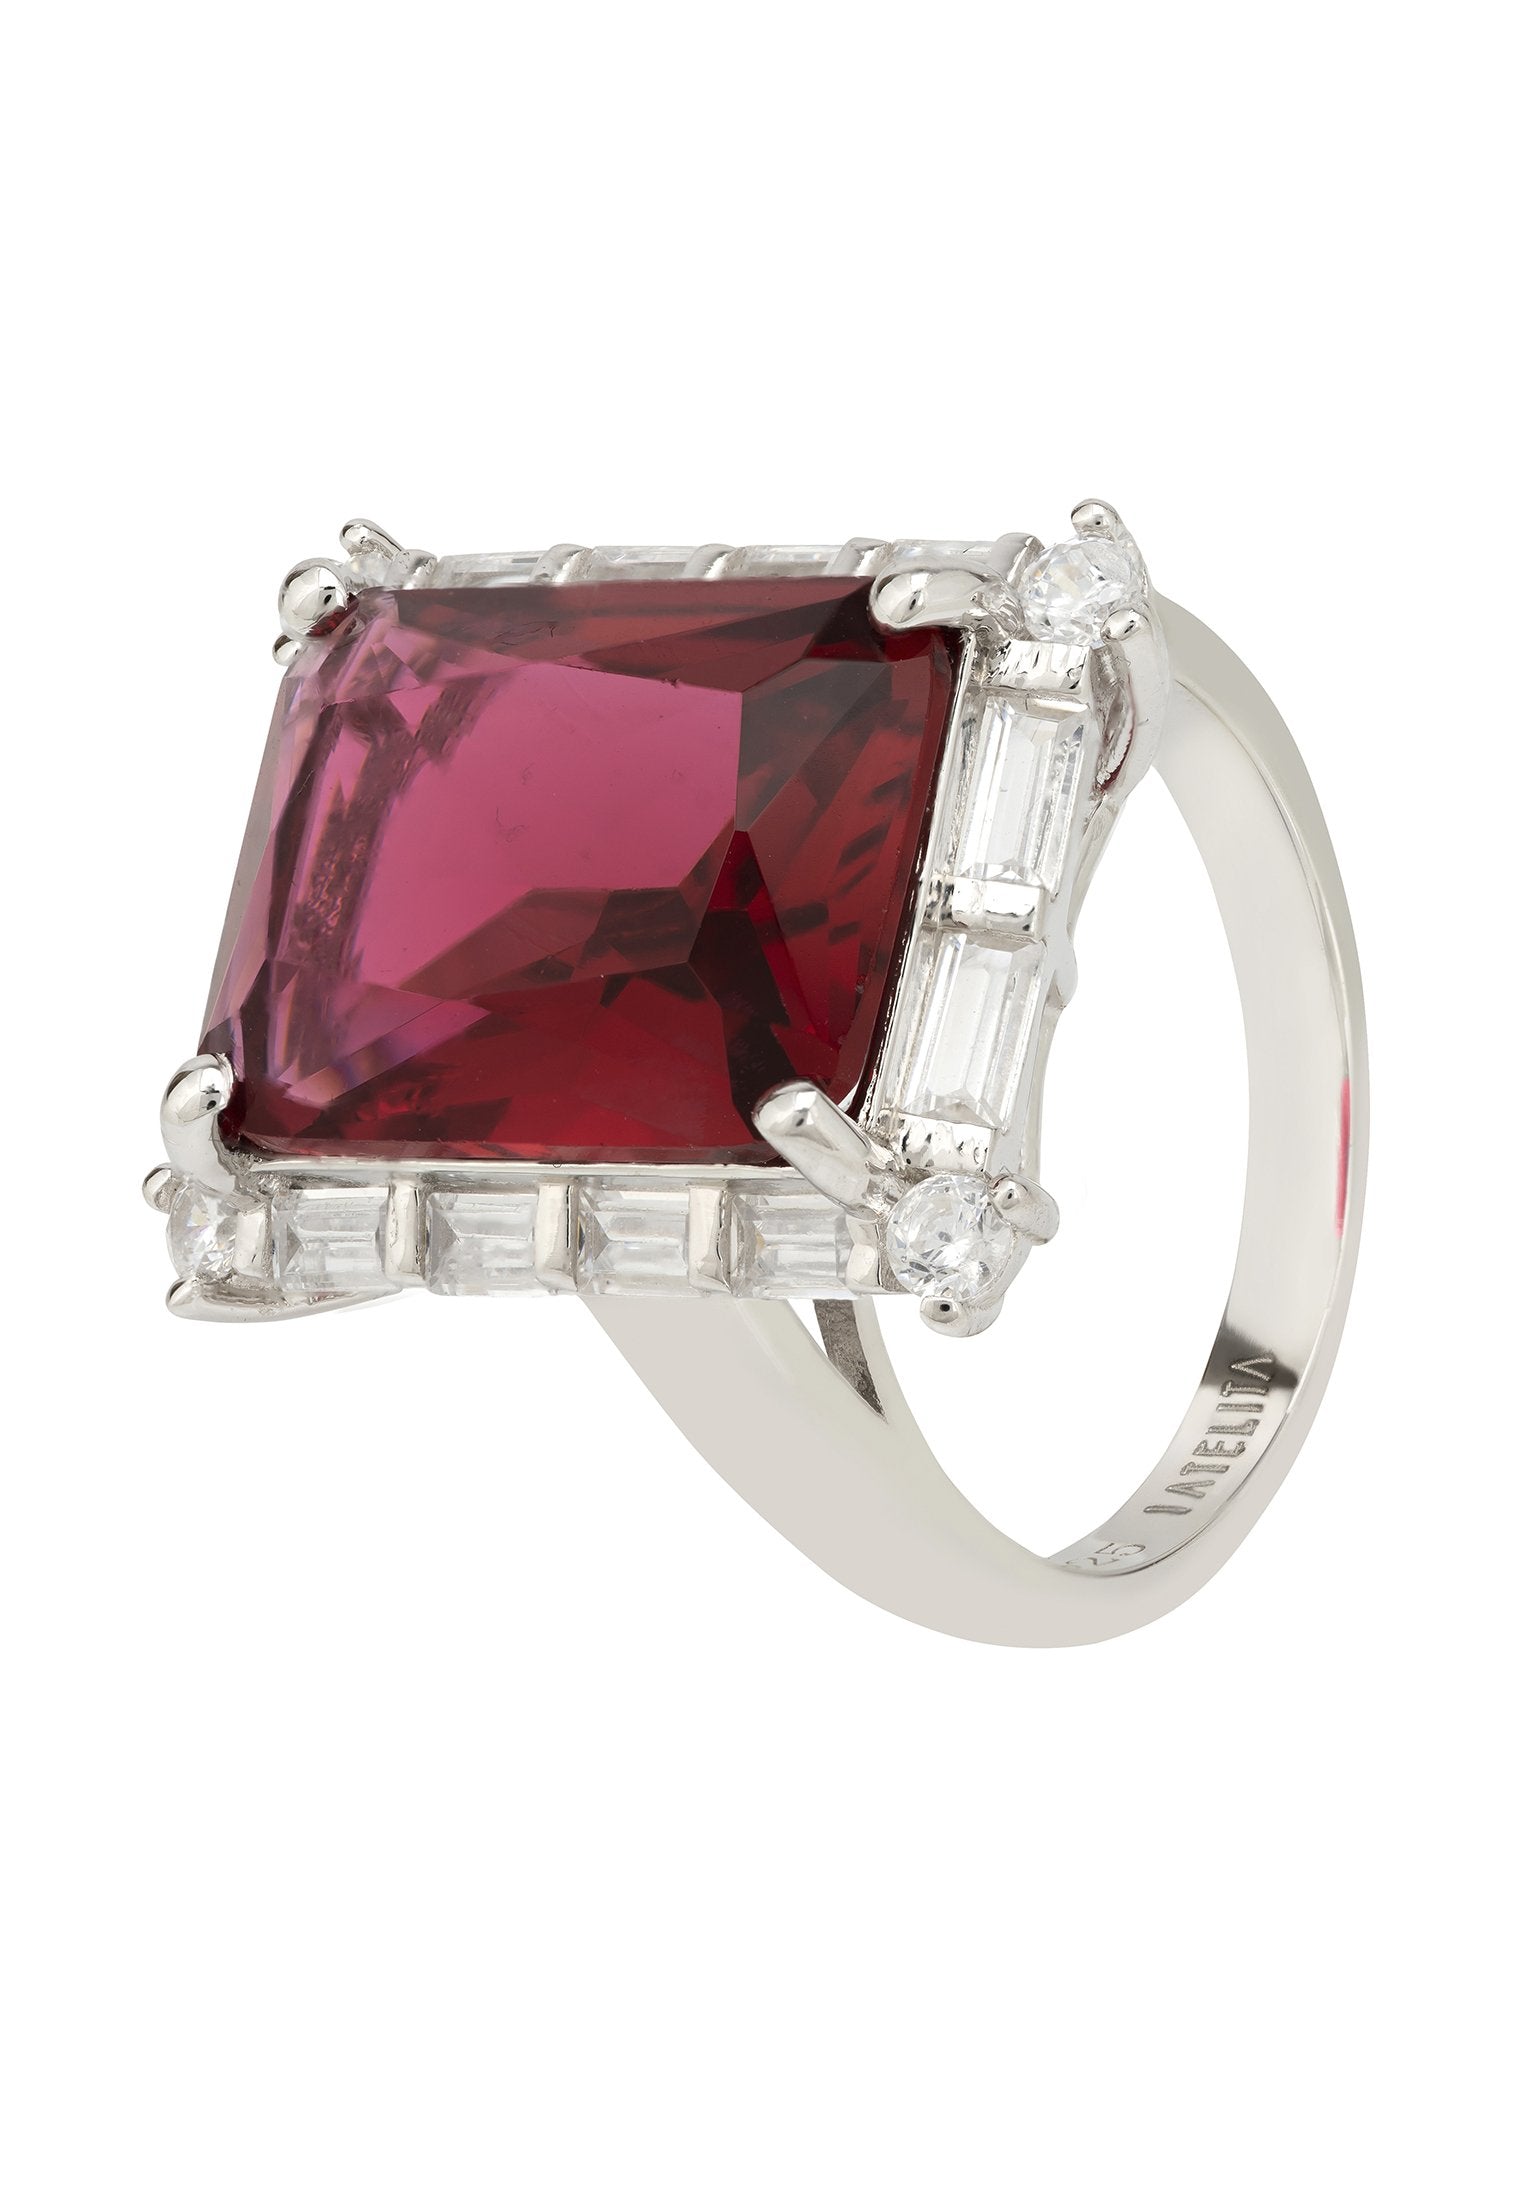 Tudor Silver Ring with Cultured Ruby and White Zircon Baguettes - Ideal Statement Jewelry for Birthdays and Weddings - Jewelry & Watches - Bijou Her -  -  - 